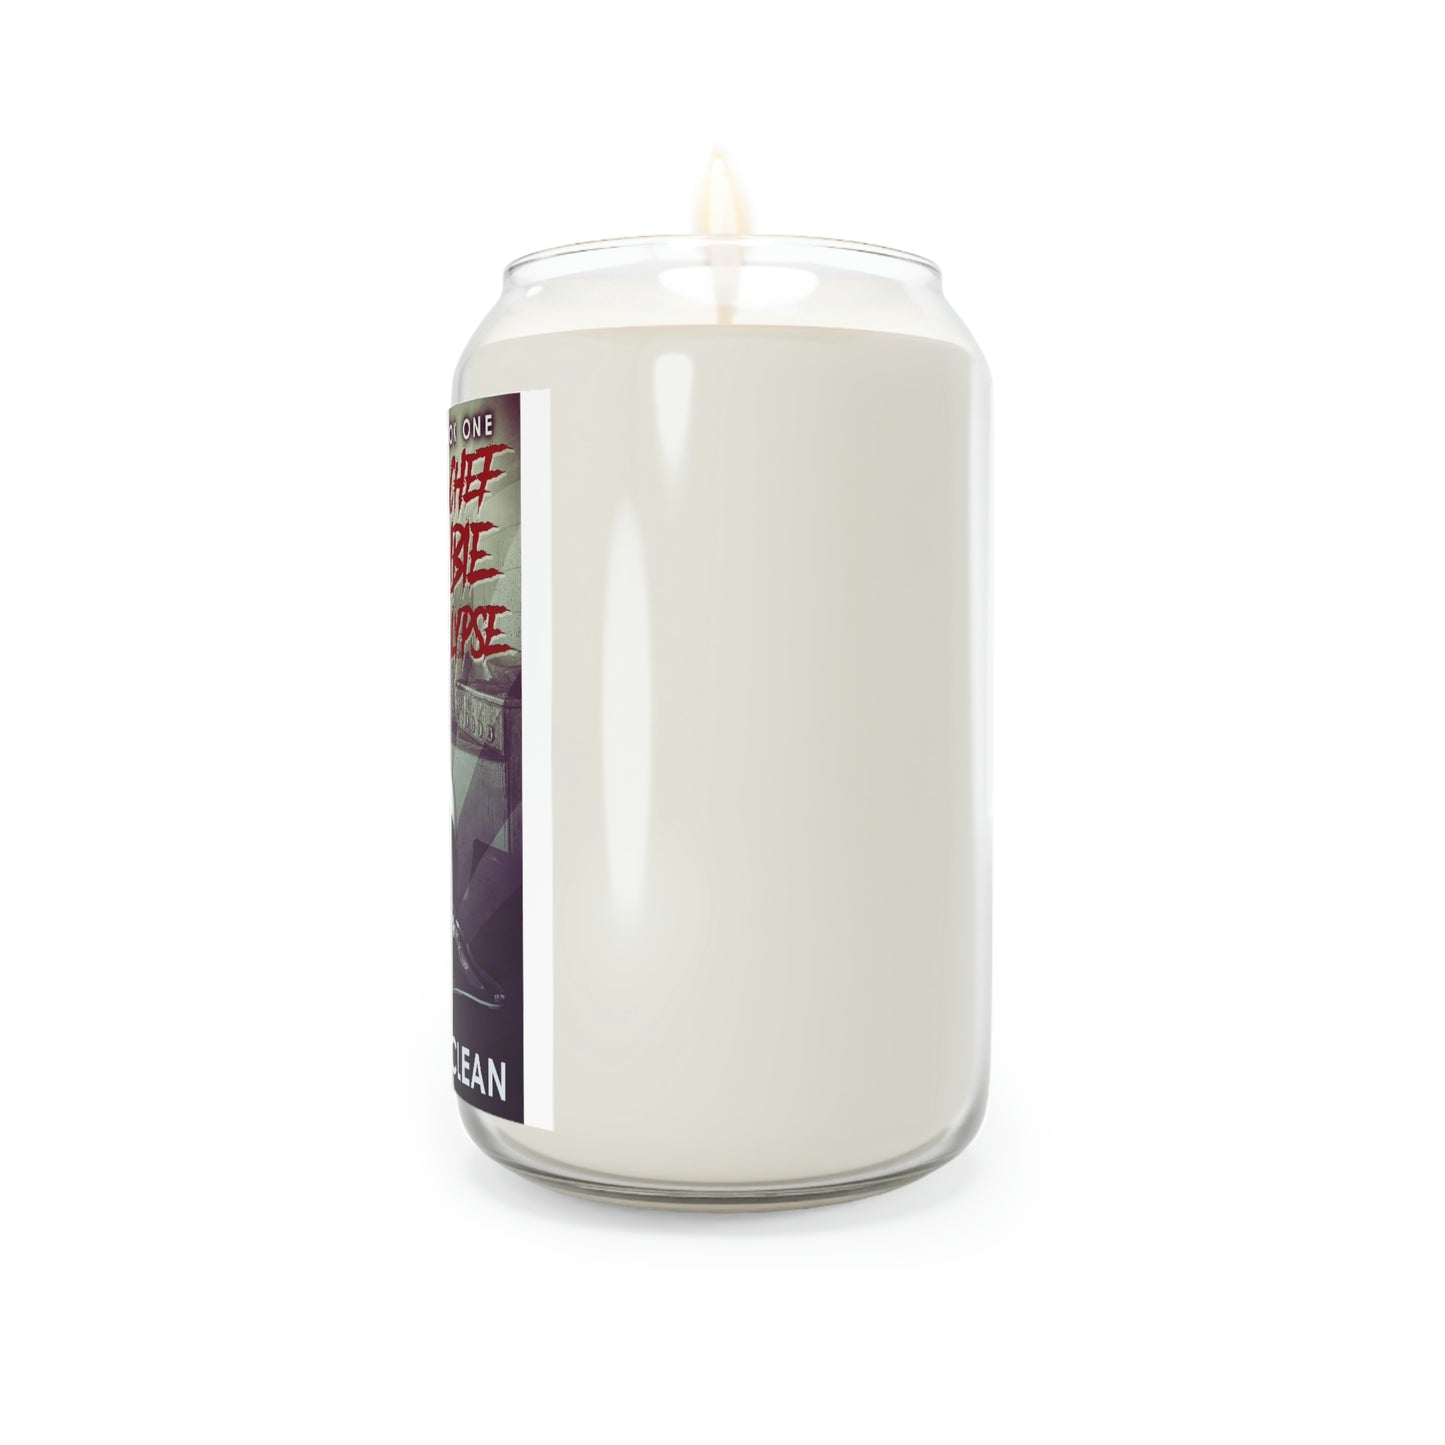 Celebrity Chef Zombie Apocalypse - Scented Candle